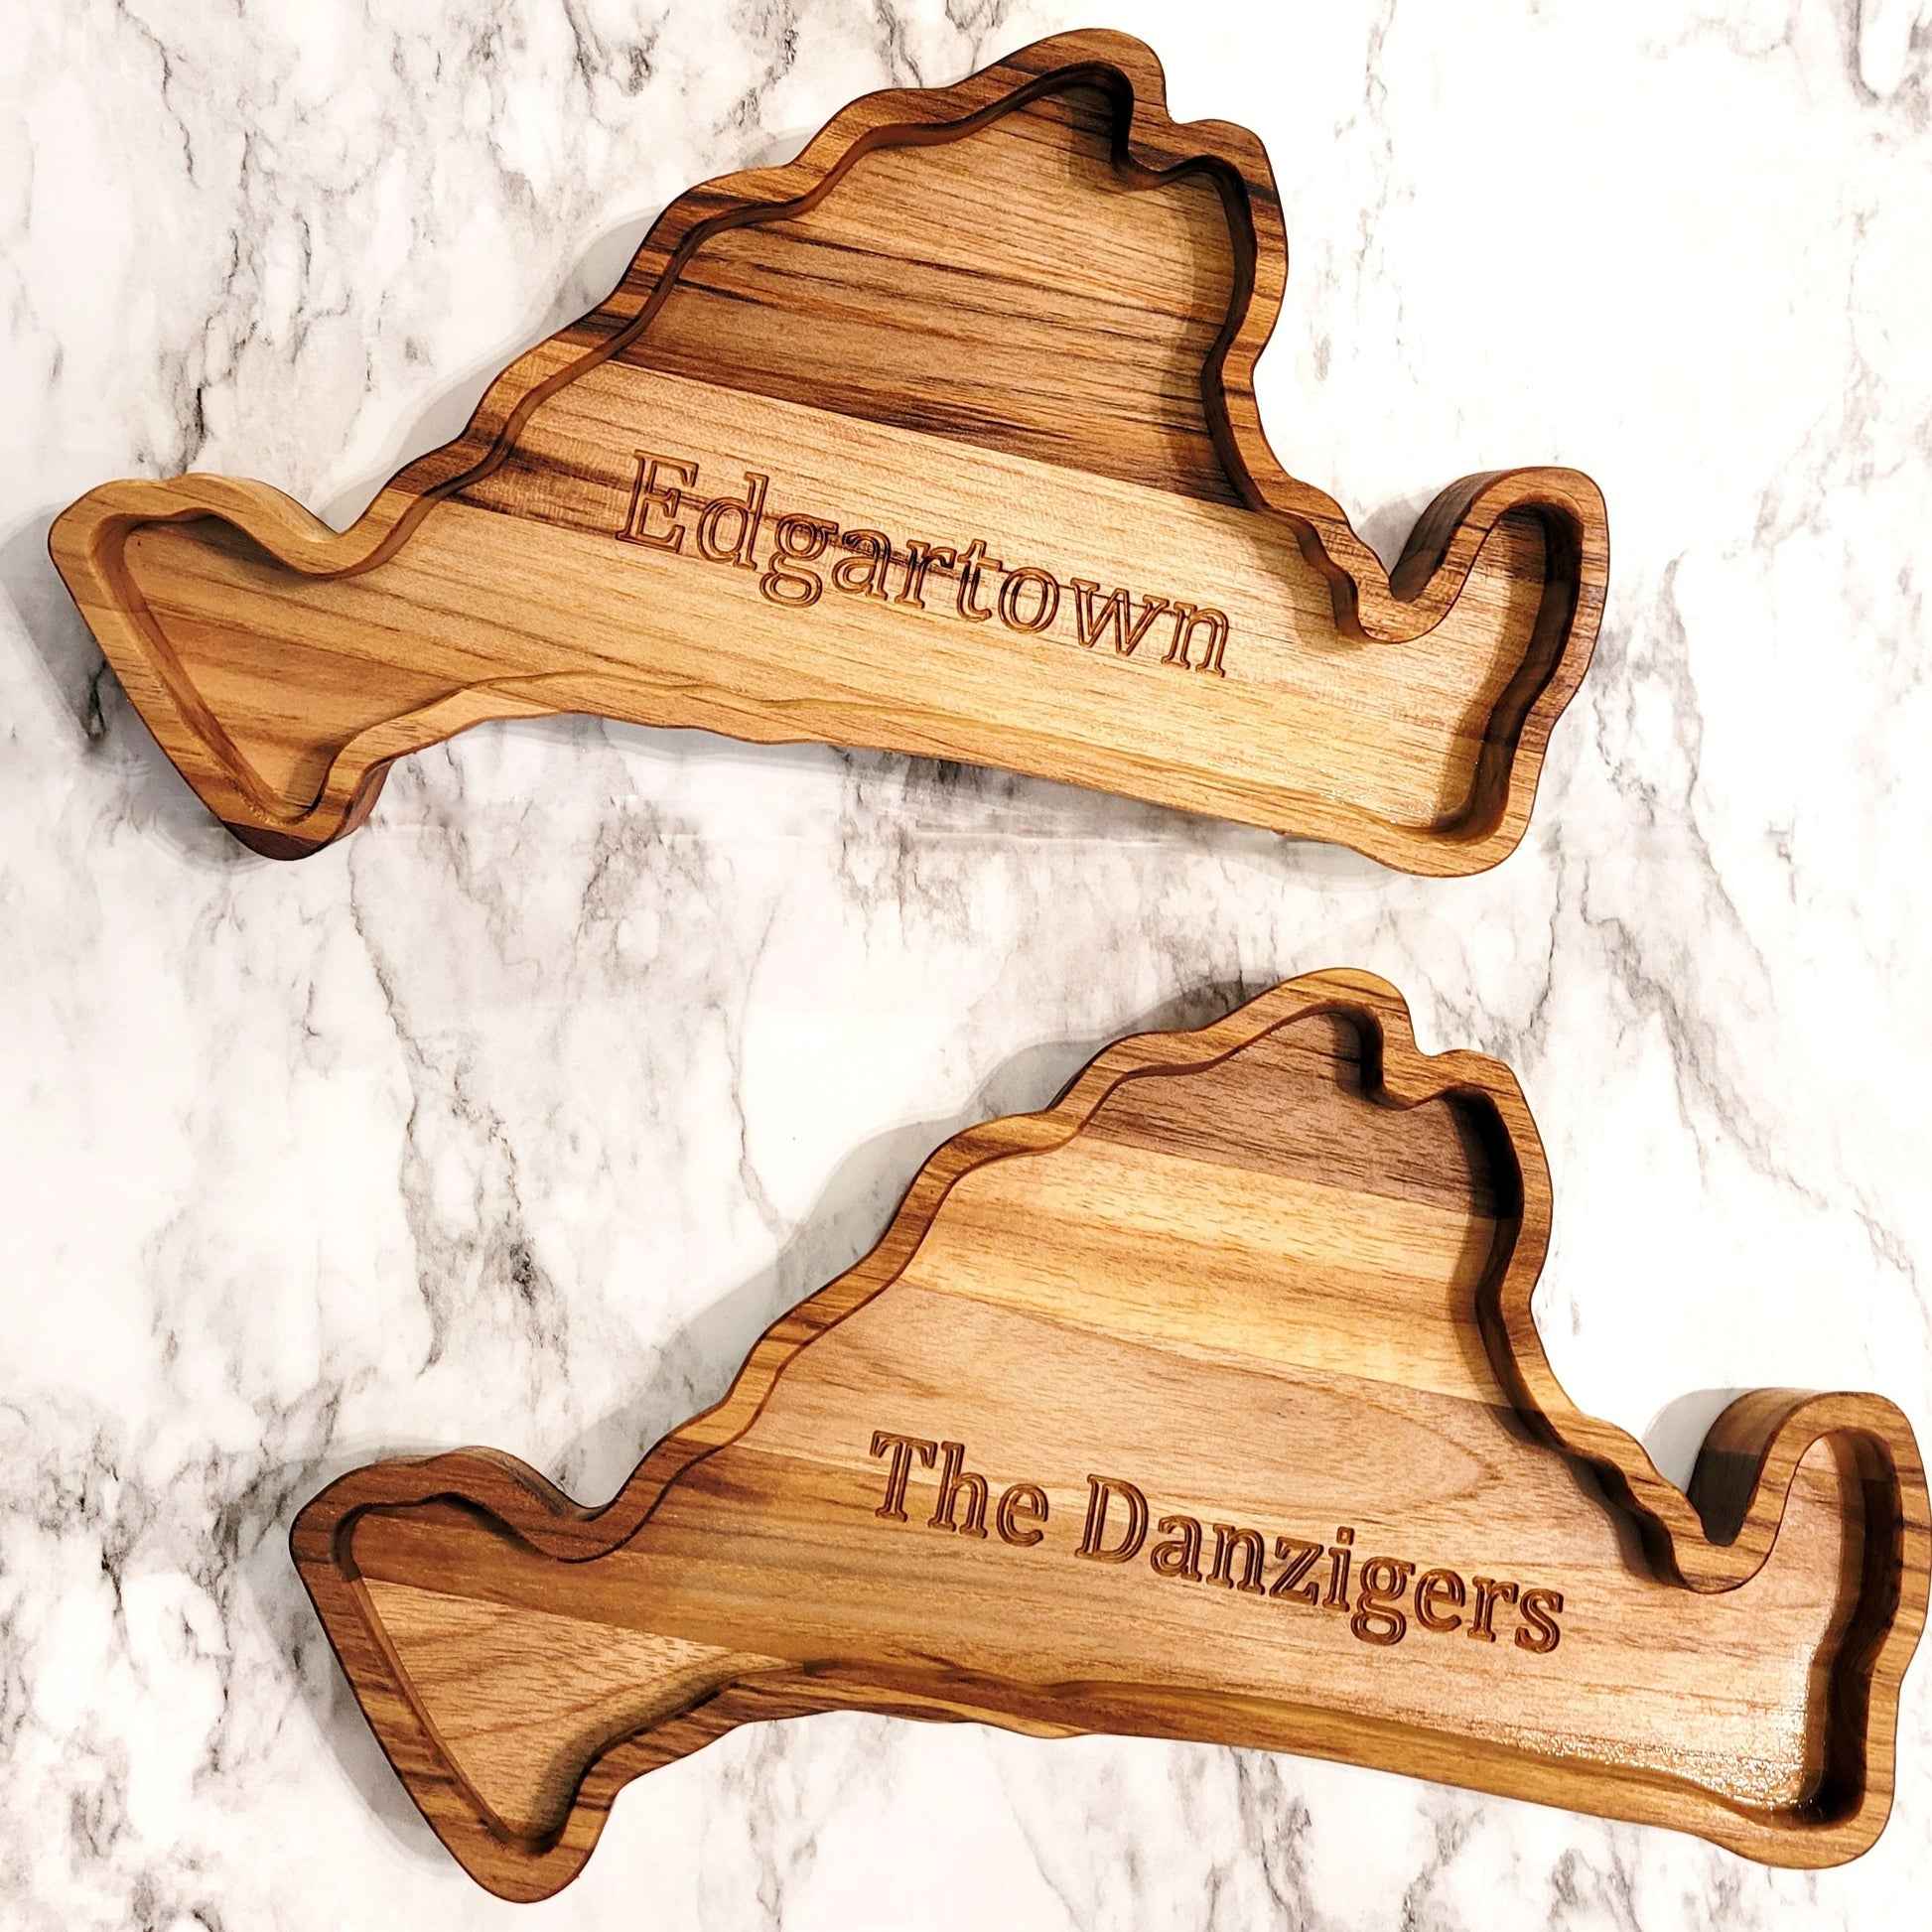 Martha's Vineyard shaped trays engraved with family name and Edgartown